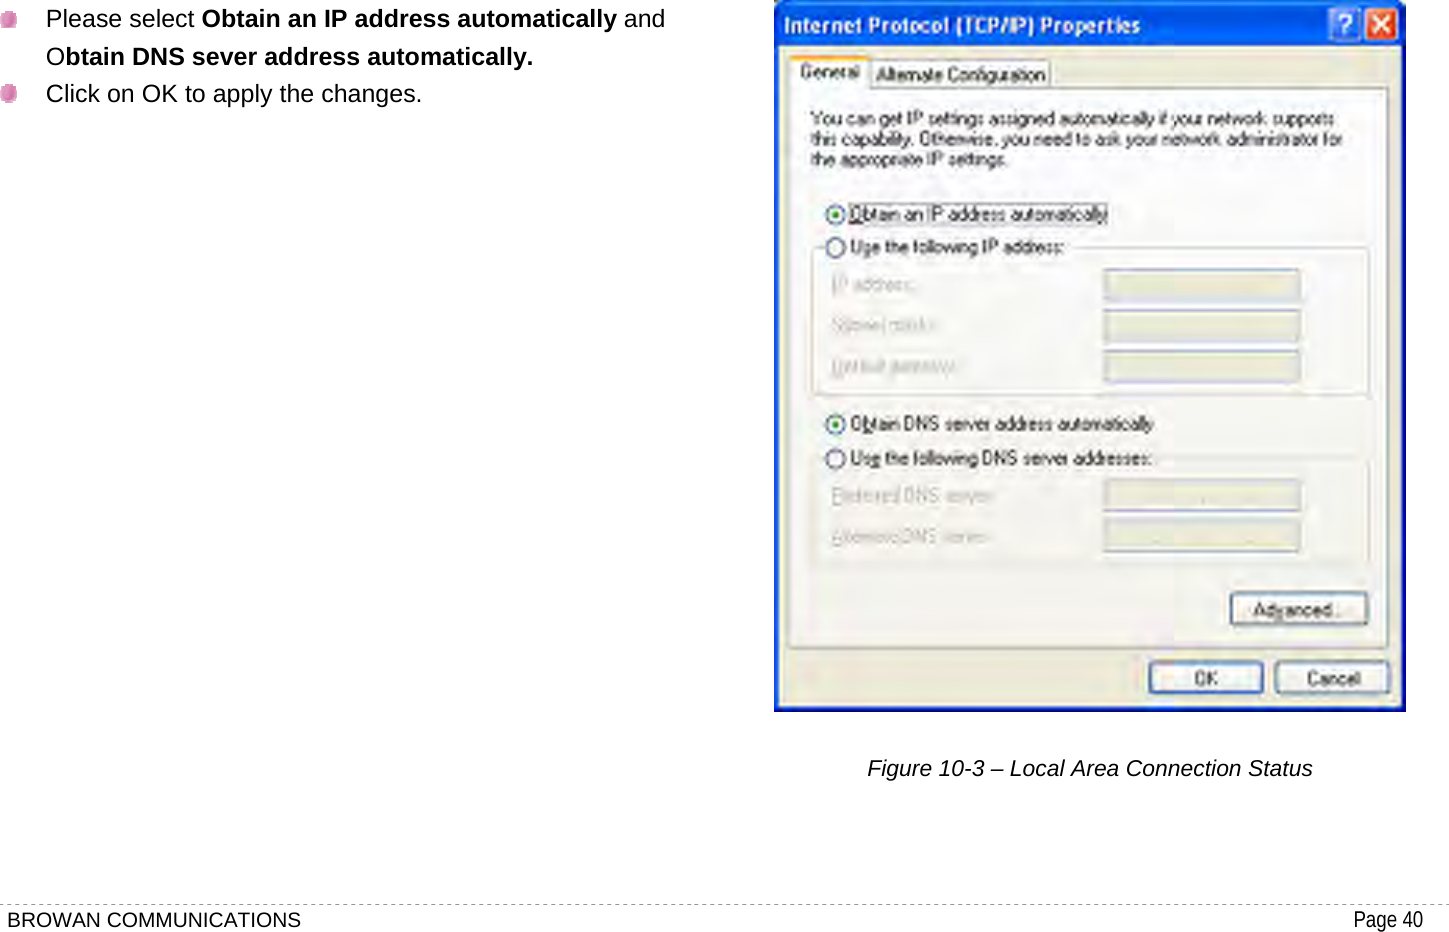 BROWAN COMMUNICATIONS                                                                                           Page 40   Please select Obtain an IP address automatically and Obtain DNS sever address automatically.   Click on OK to apply the changes.                       Figure 10-3 – Local Area Connection Status   